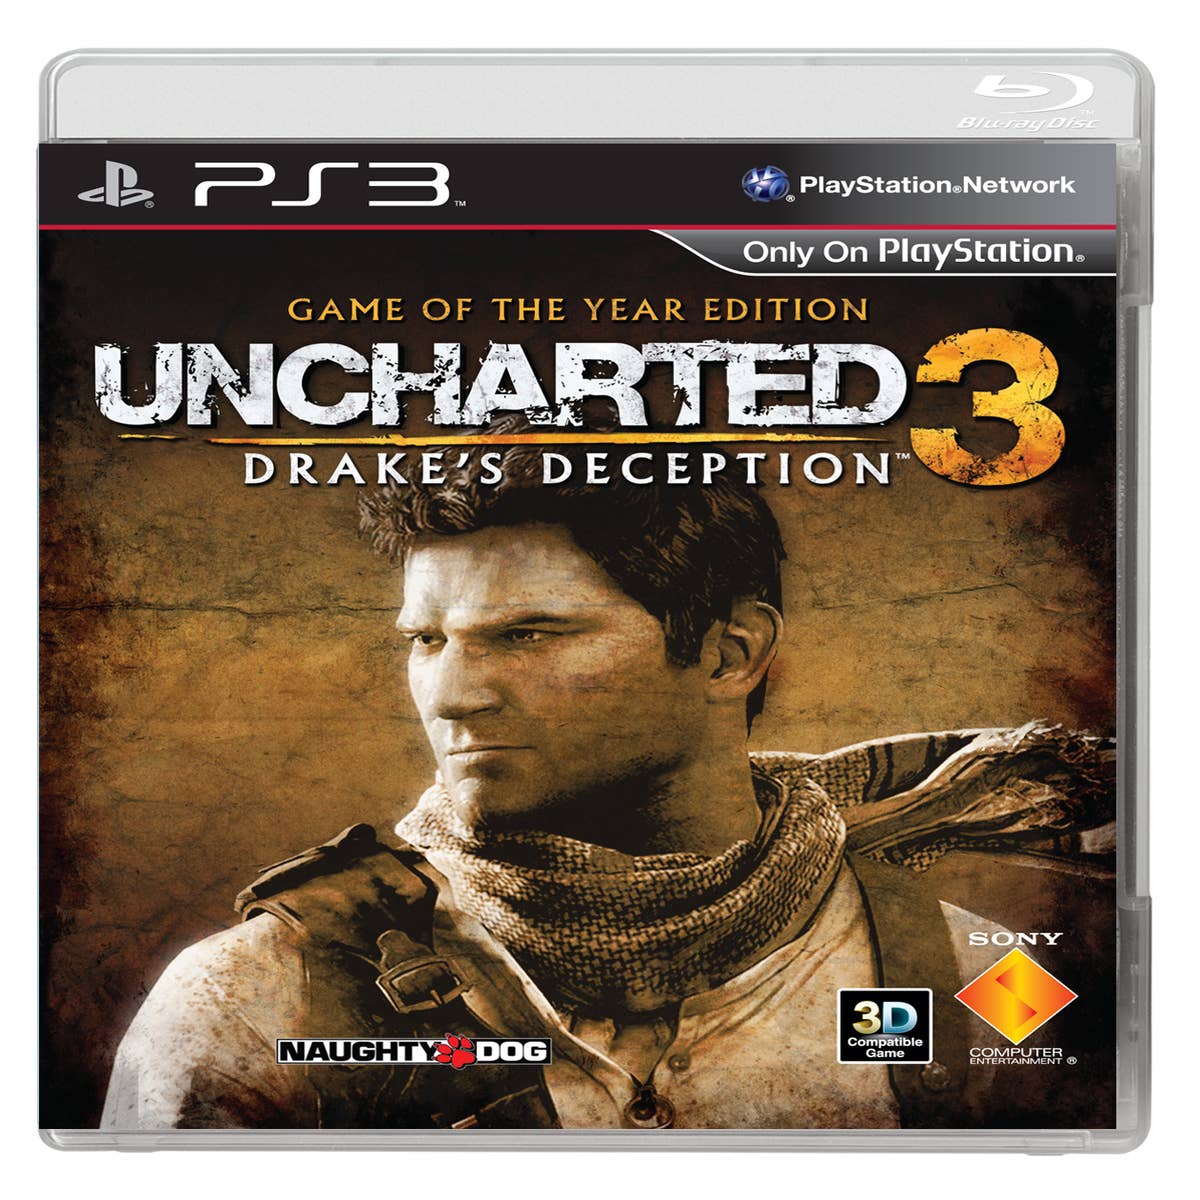  Uncharted 1&2 Dual Pack PS3 : Video Games